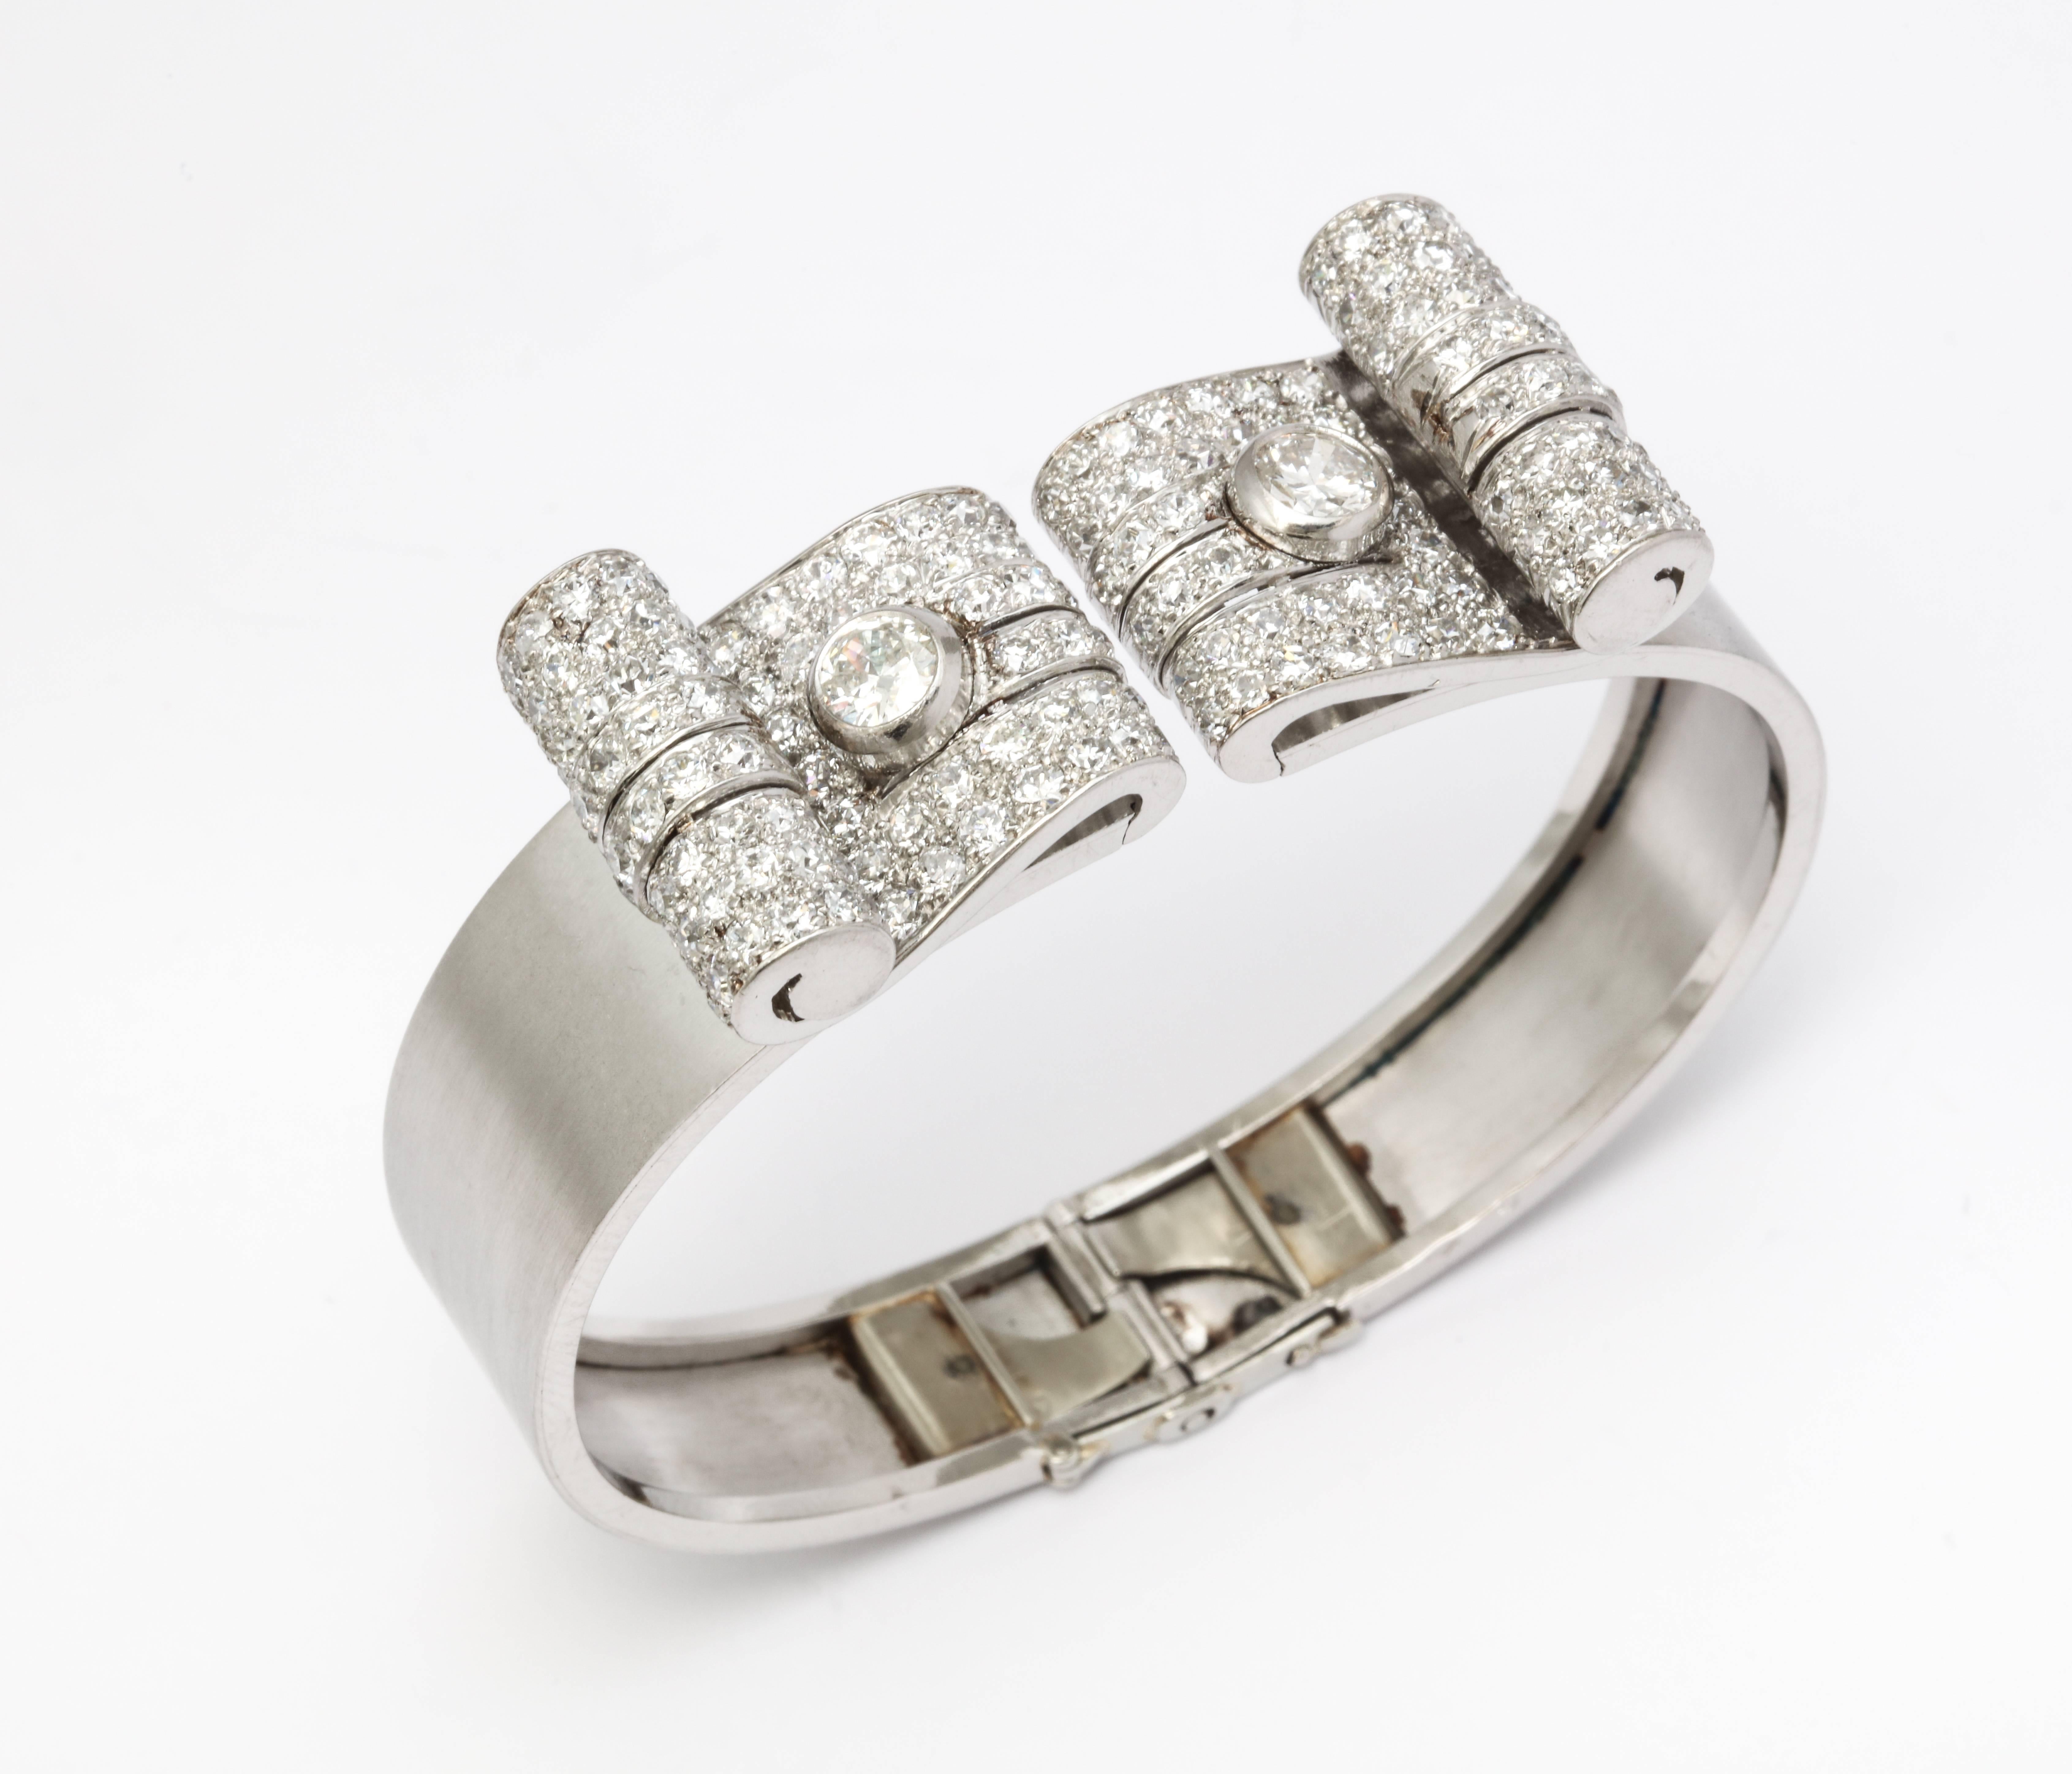 French Art Deco Diamond Bangle

With French hall marks and unidentified Maker's Marks

Set in matte Platinum

Made in Paris circa 1920

Circumference: 6.75